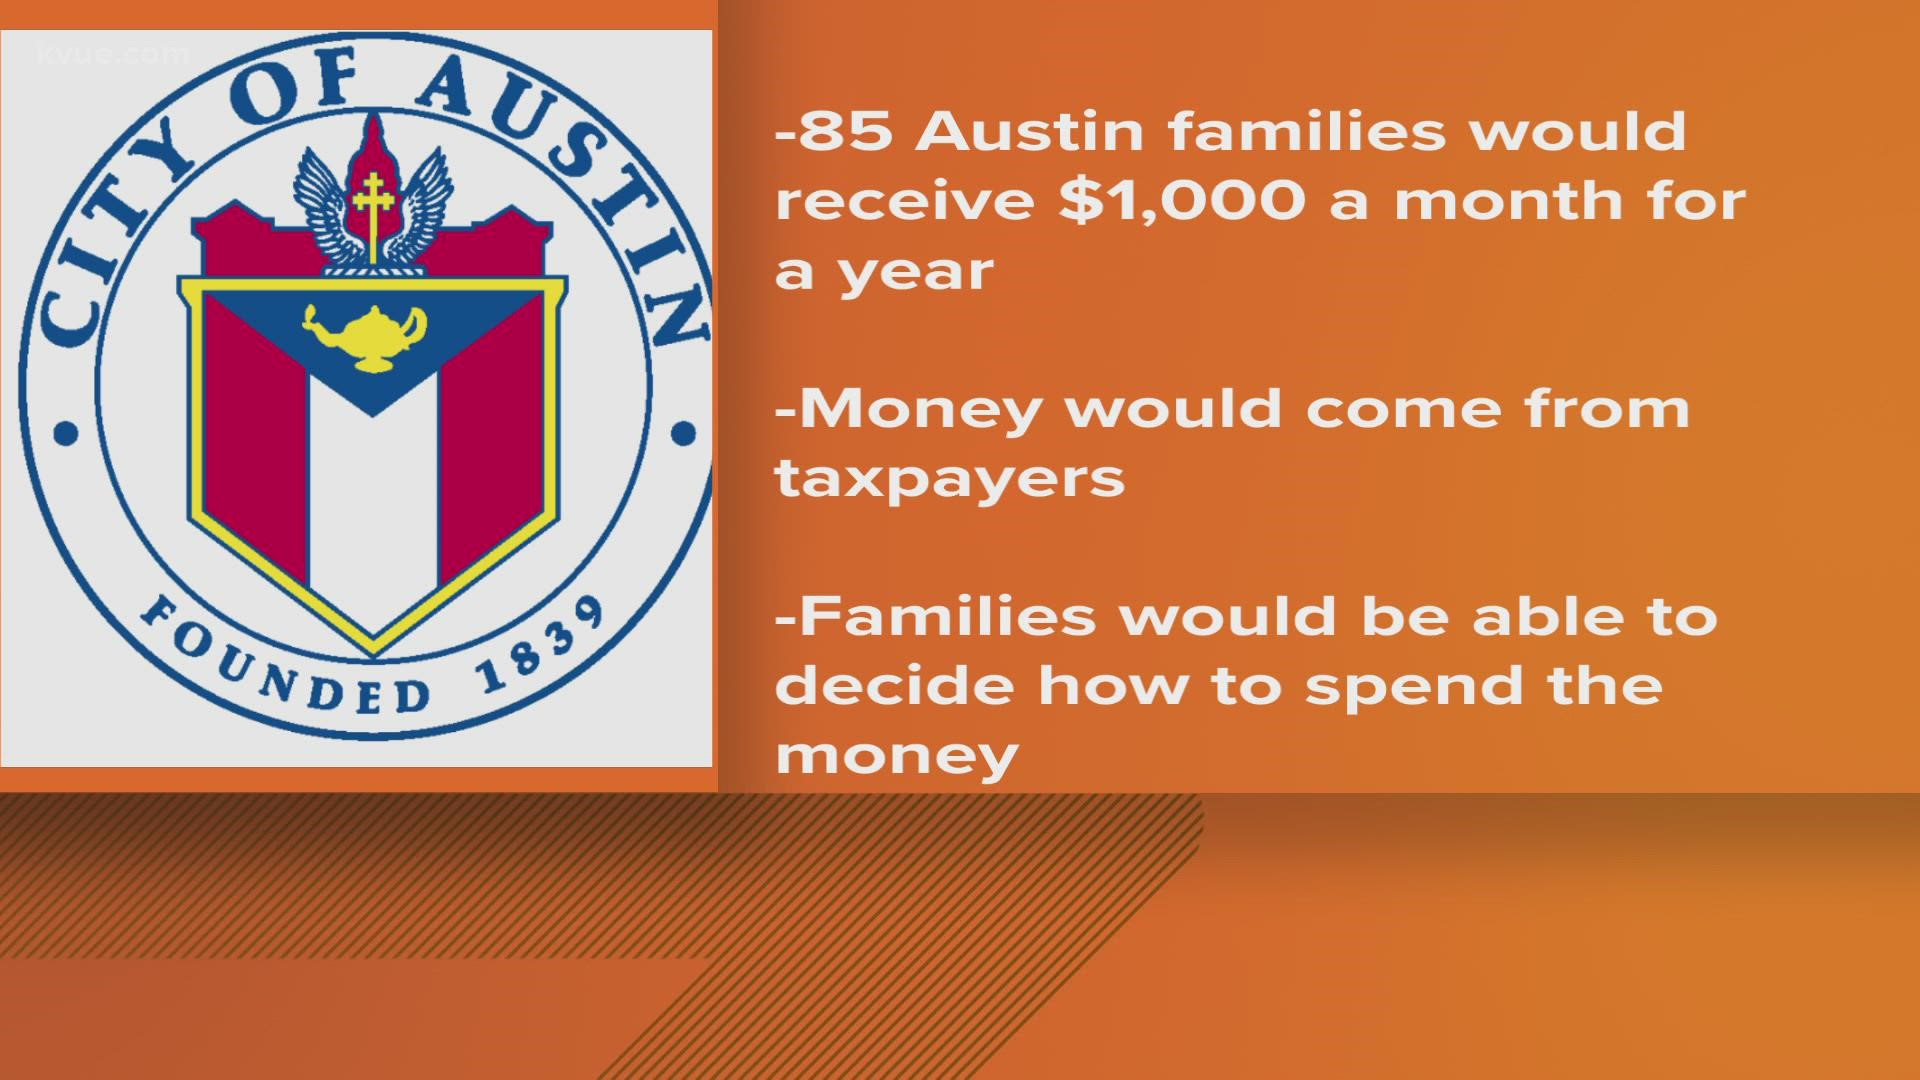 On Thursday, the Austin City Council will discuss a plan that could give money to families in need.